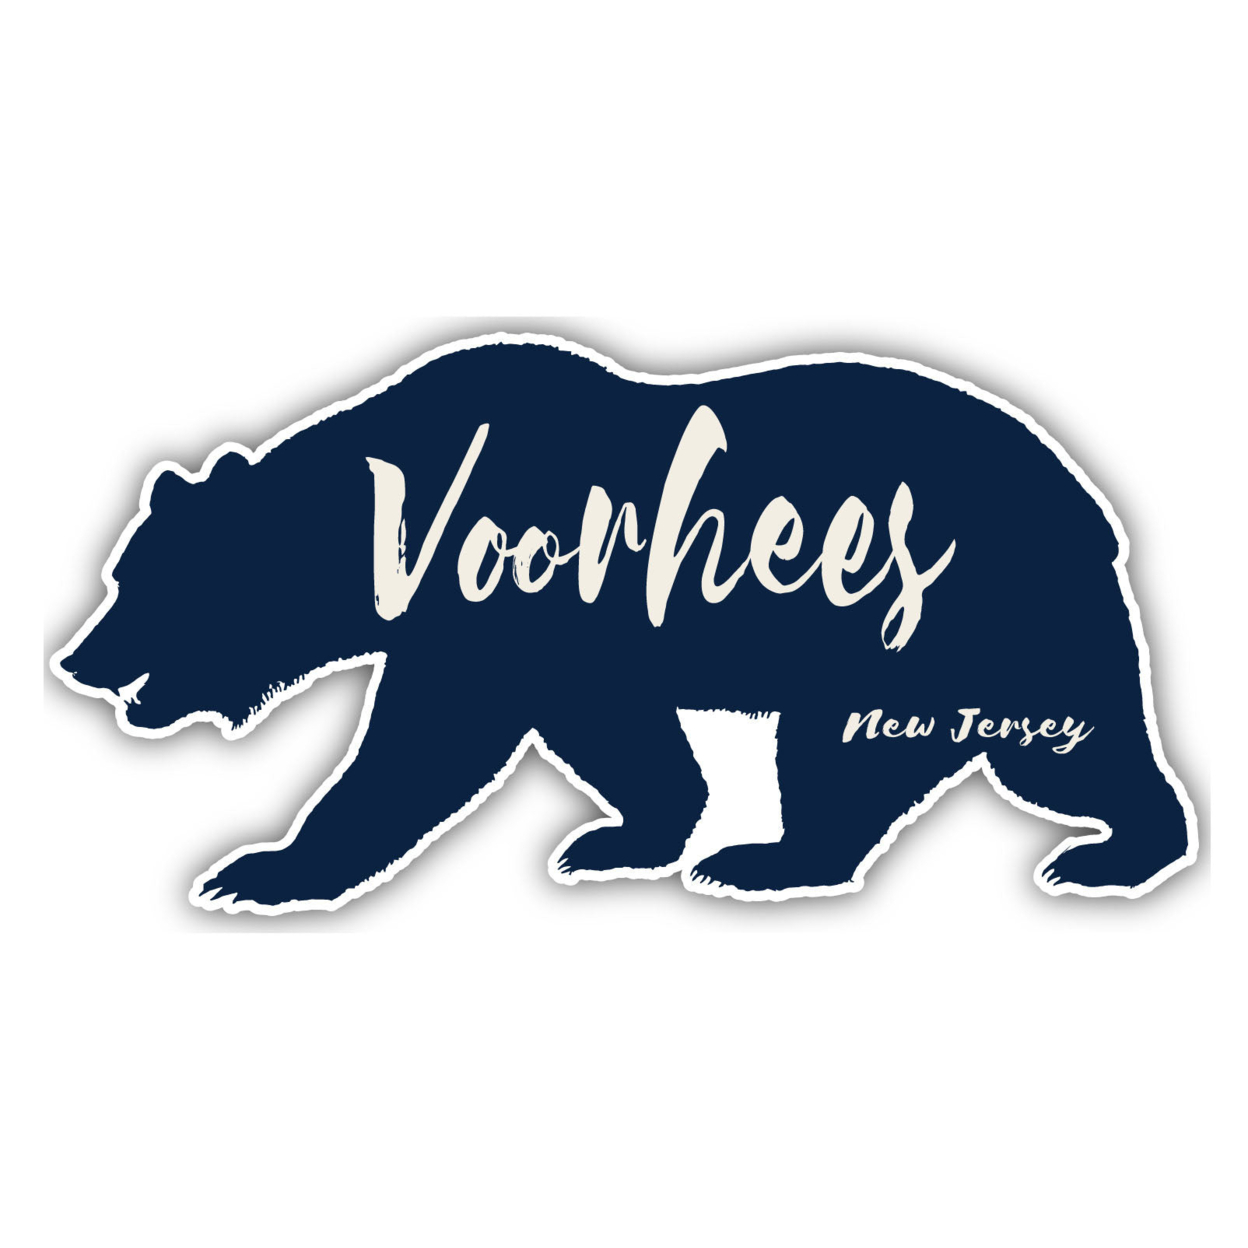 Voorhees New Jersey Souvenir Decorative Stickers (Choose Theme And Size) - Single Unit, 2-Inch, Bear